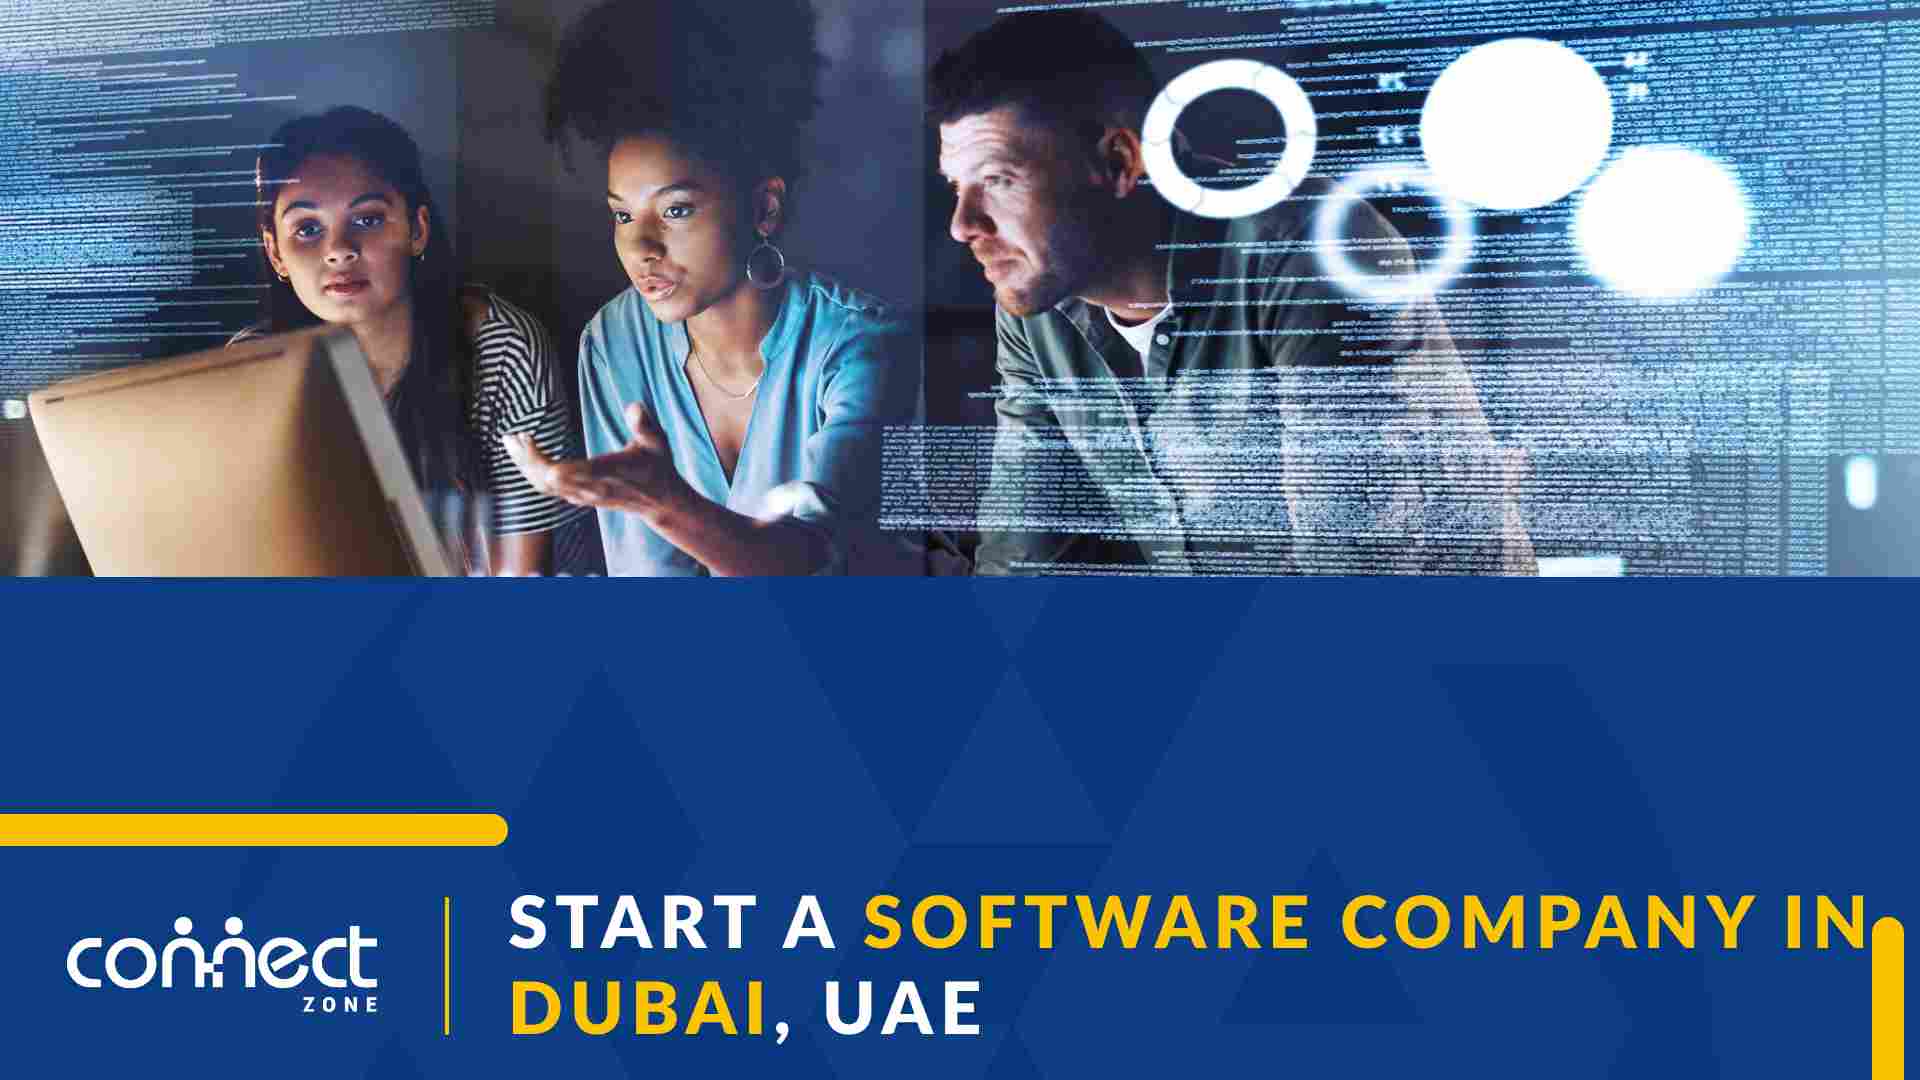 how to start a software company in dubai